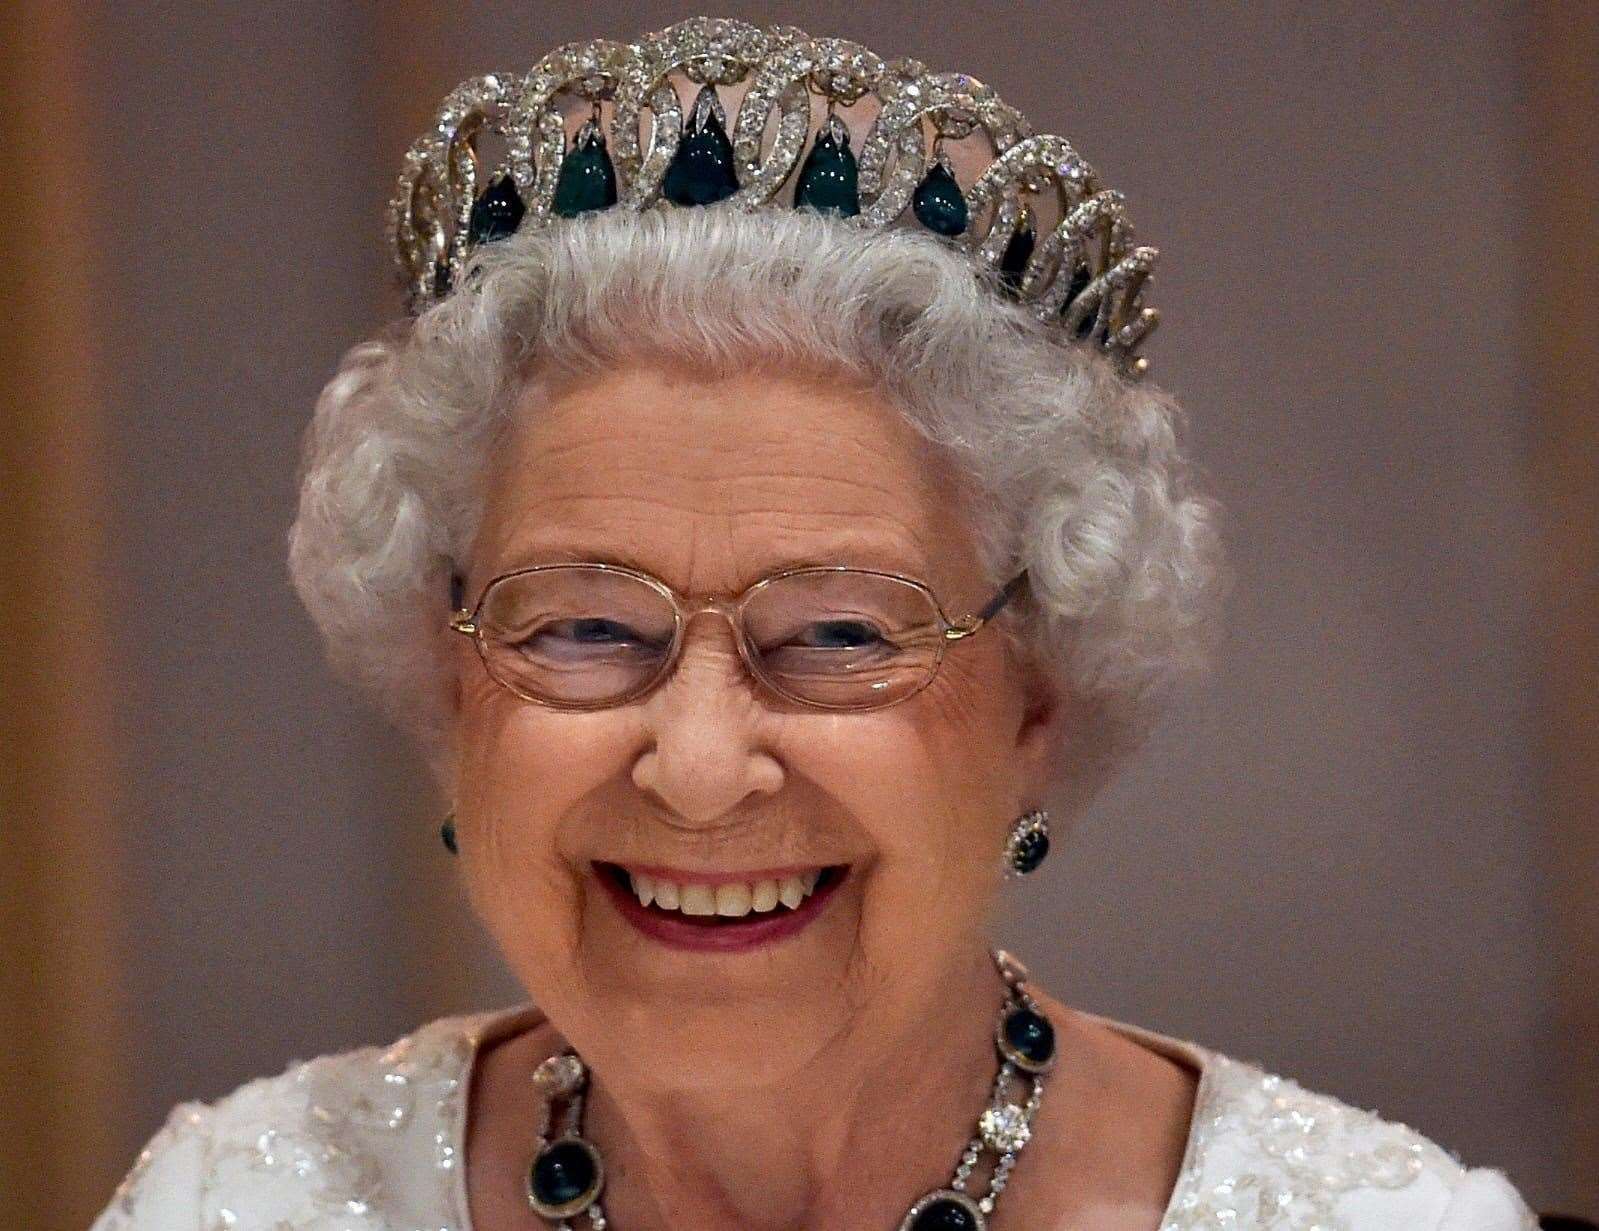 Her Majesty the Queen celebrates her Platinum Jubilee this year